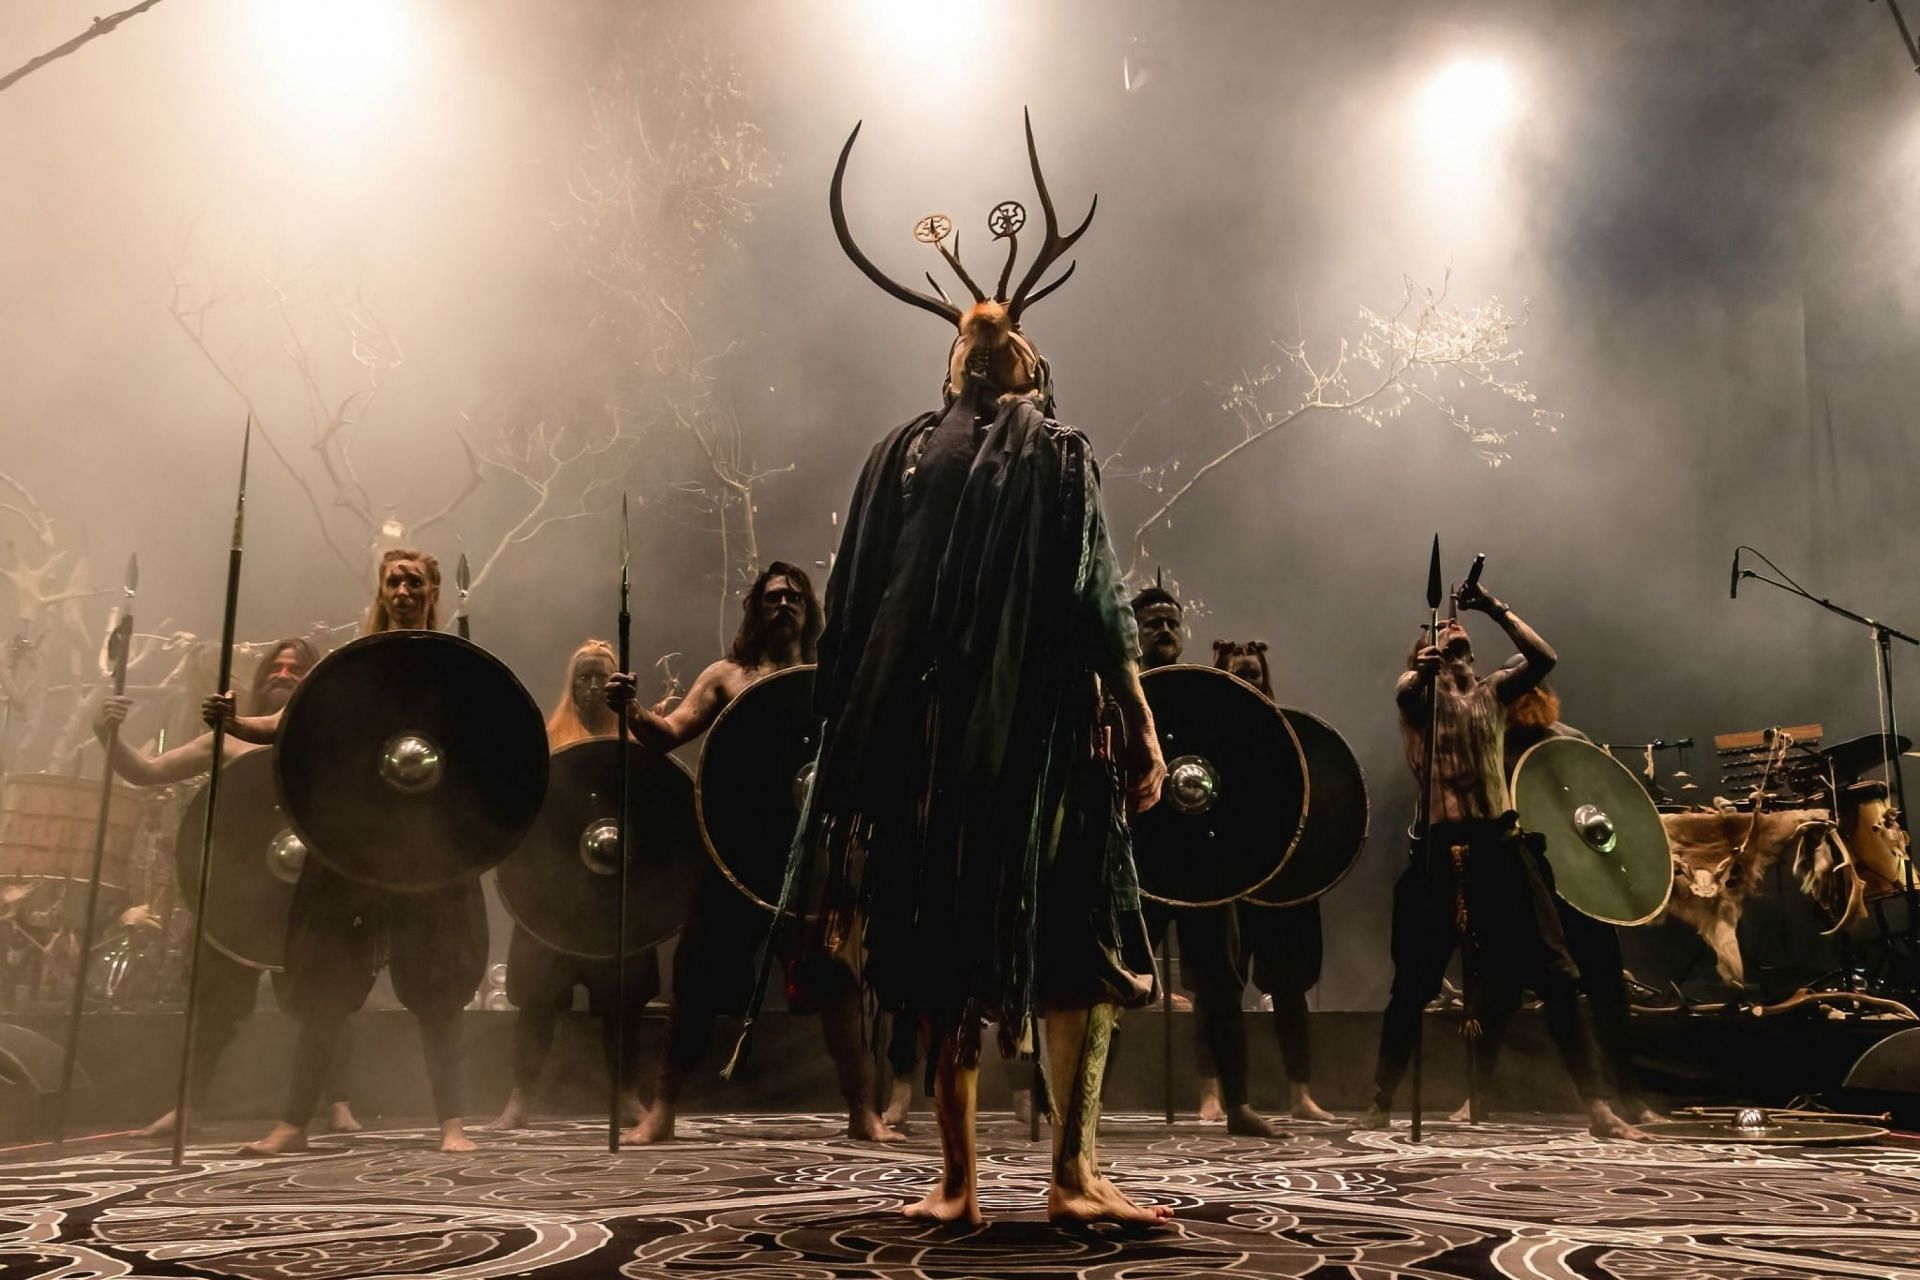 Heilung on stage at Alcatraz in Milan, Italy on December 9, 2022 (Image via Getty Images) 